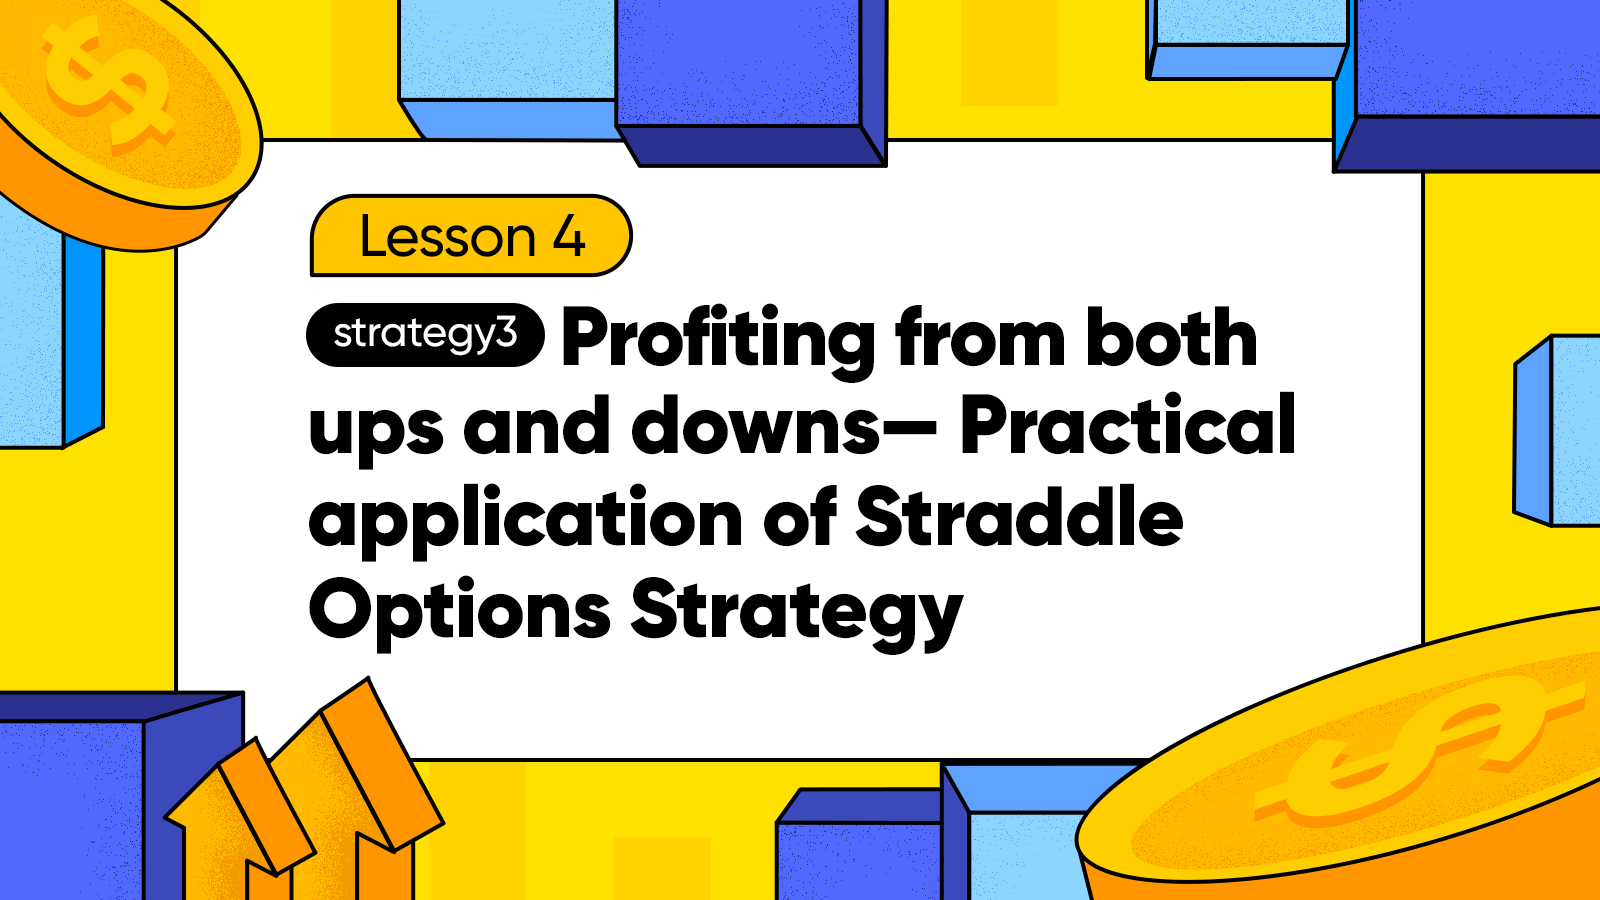 4.Practical Application of Straddle Options Strategy